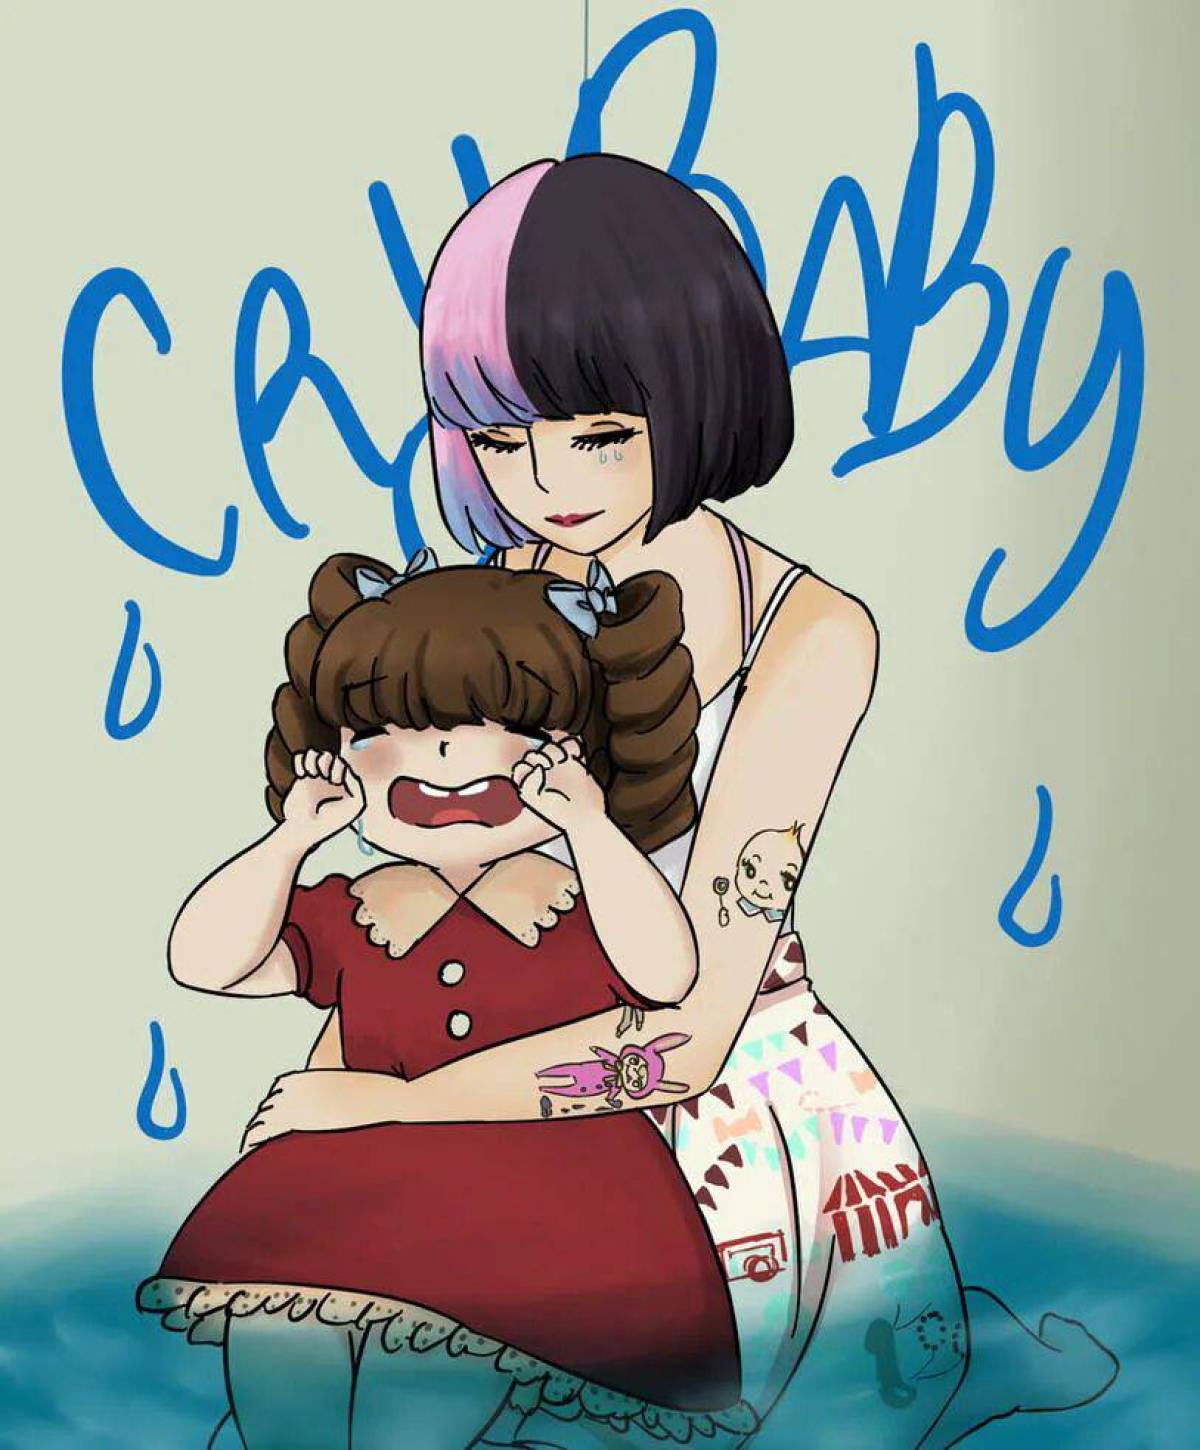 Crybaby #30